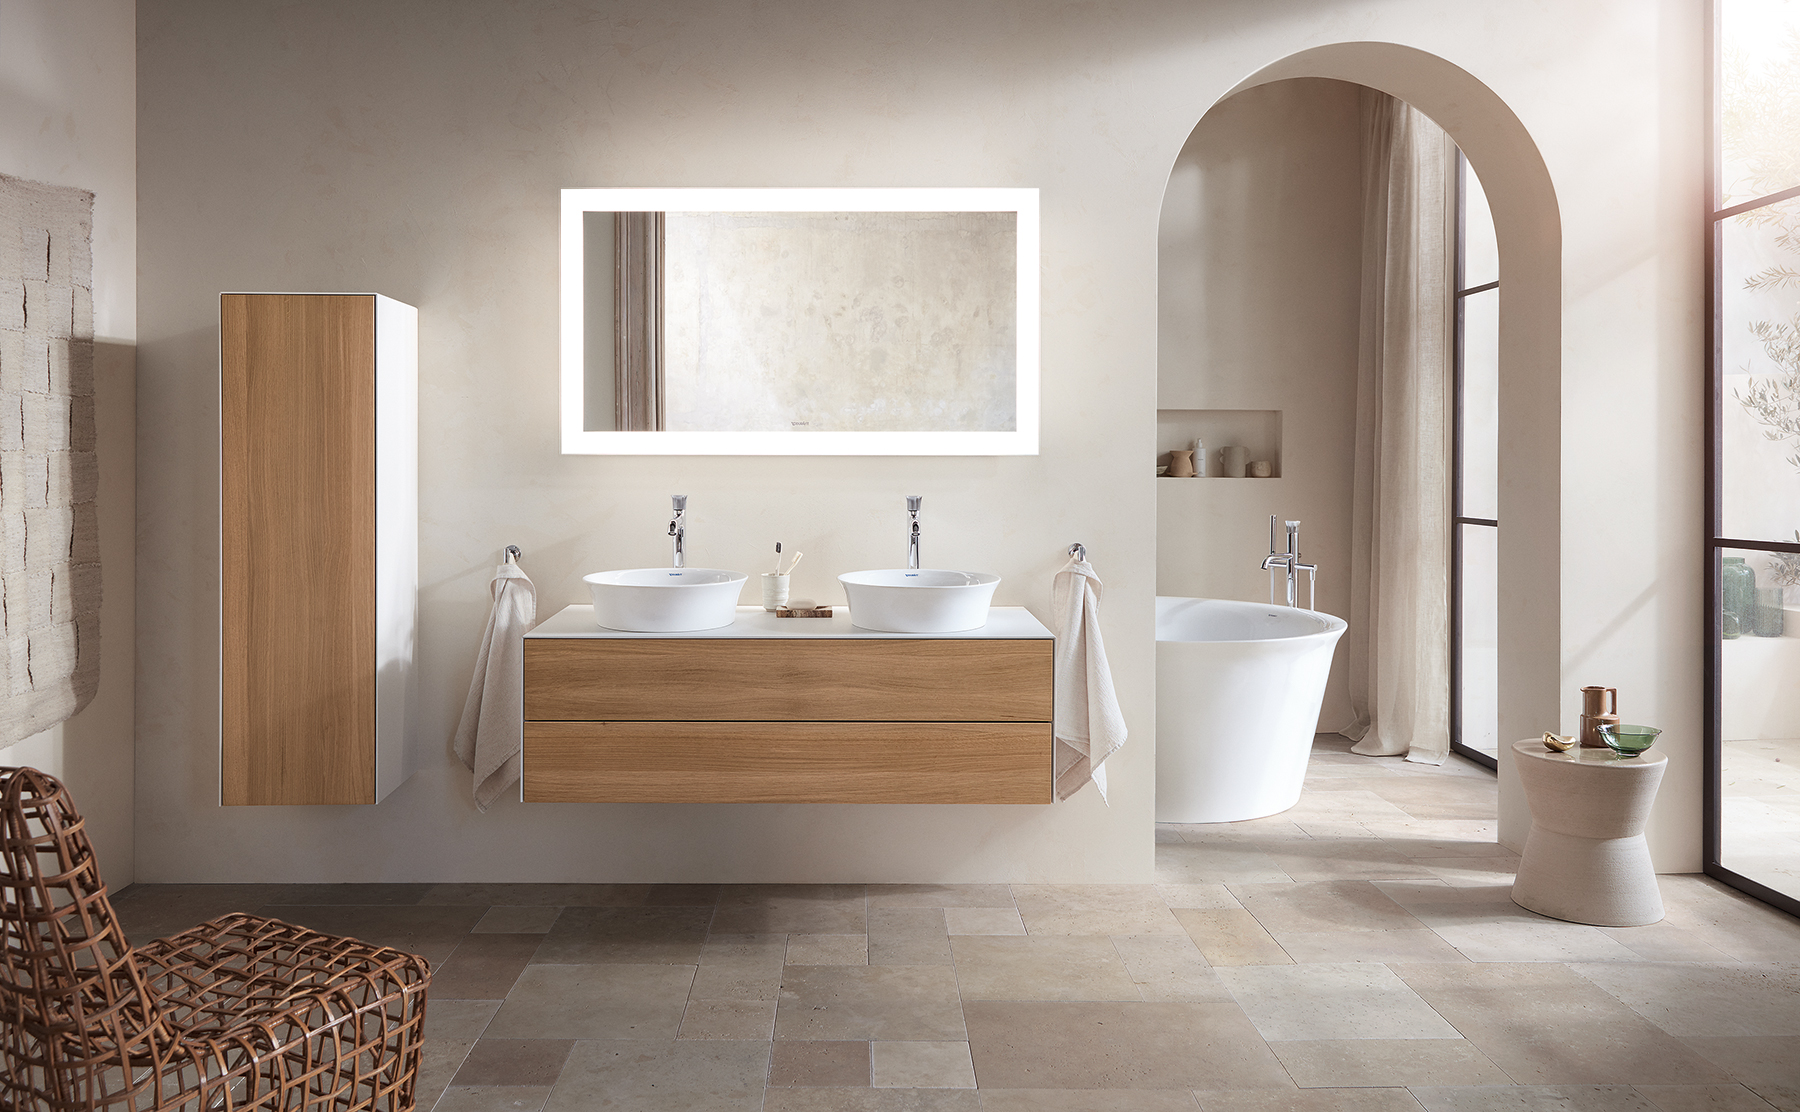 Distinctive New Stylish Furniture Is A Great Style Choice For Your Bathroom 